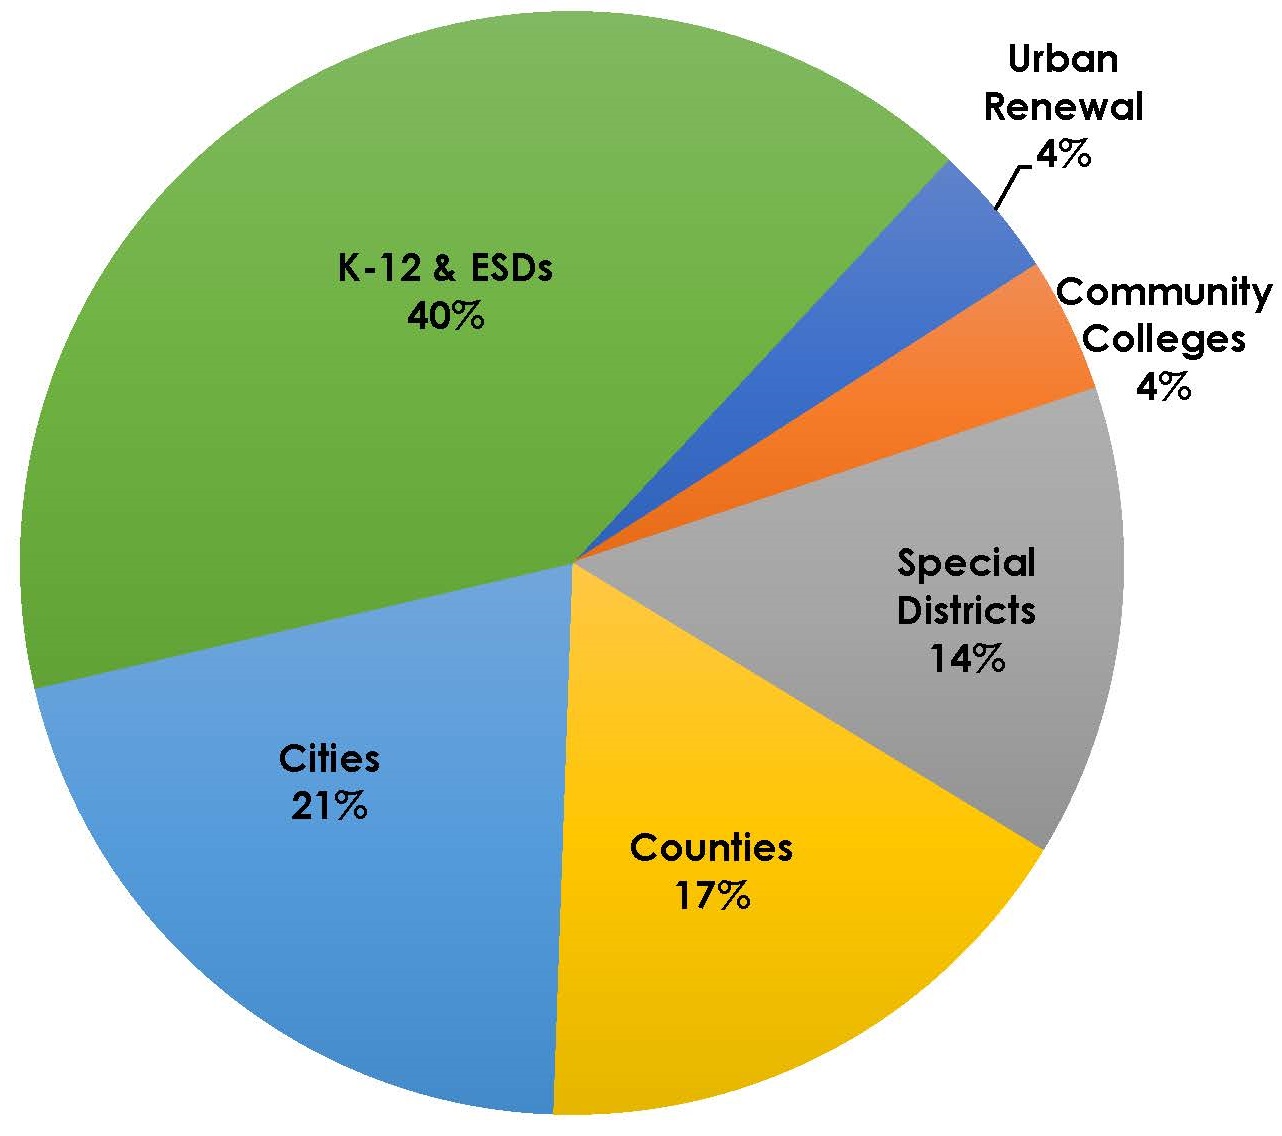 Pie chart shows K-12 & ESDs 40%, Cities 21%, Counties 17%, Special Districts 14 %, Urban Renewal 4% Community colleges 4%